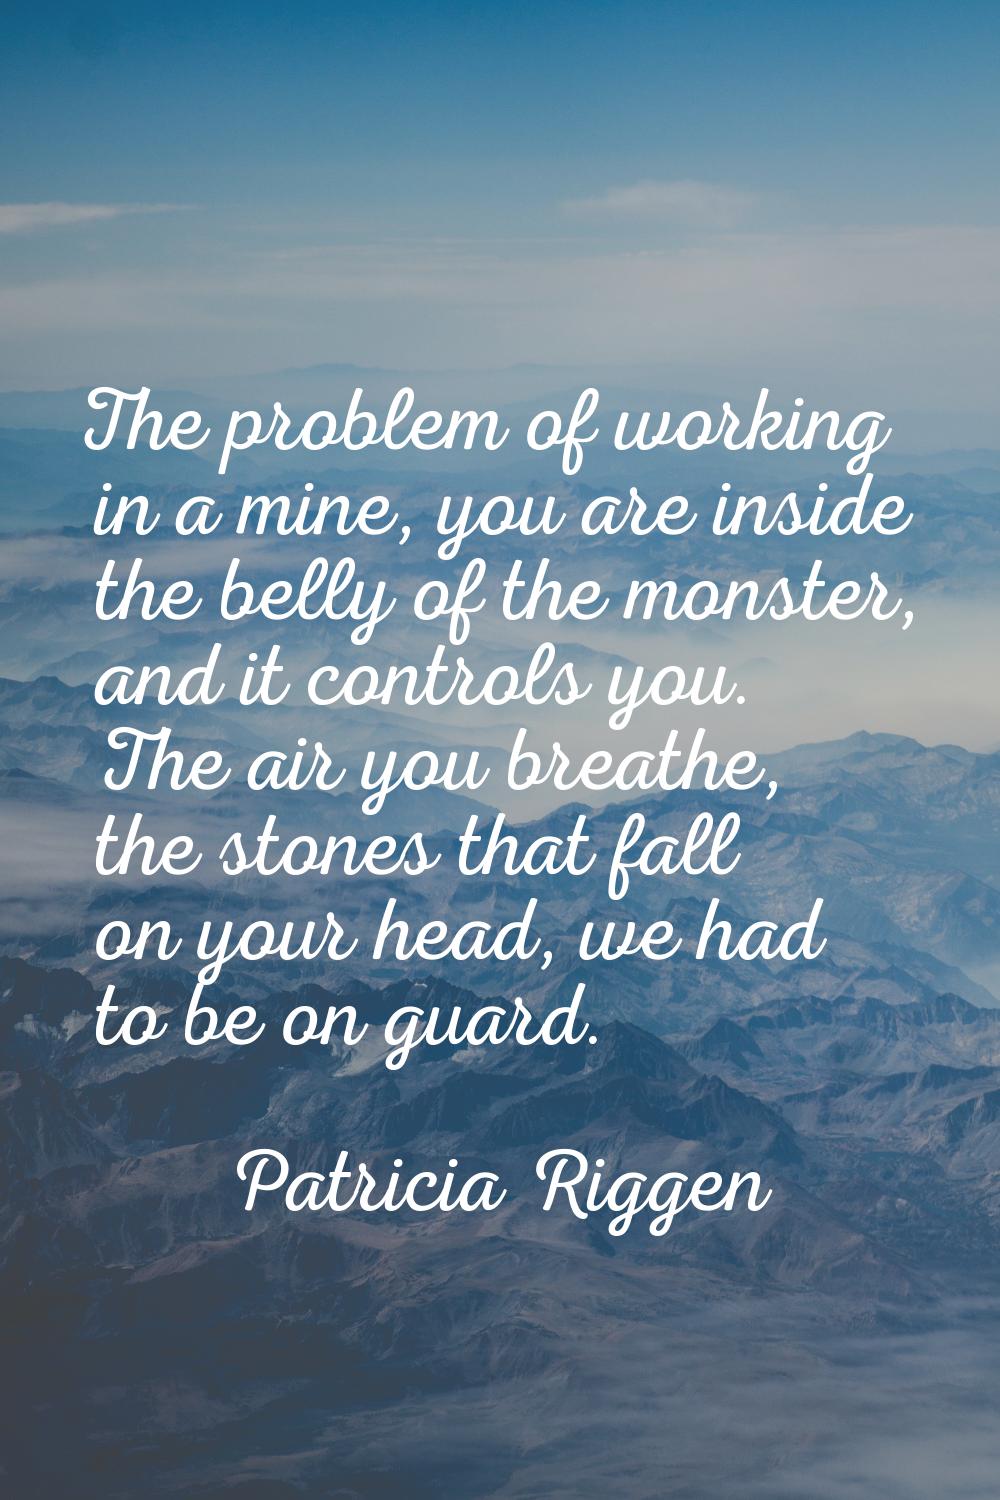 The problem of working in a mine, you are inside the belly of the monster, and it controls you. The